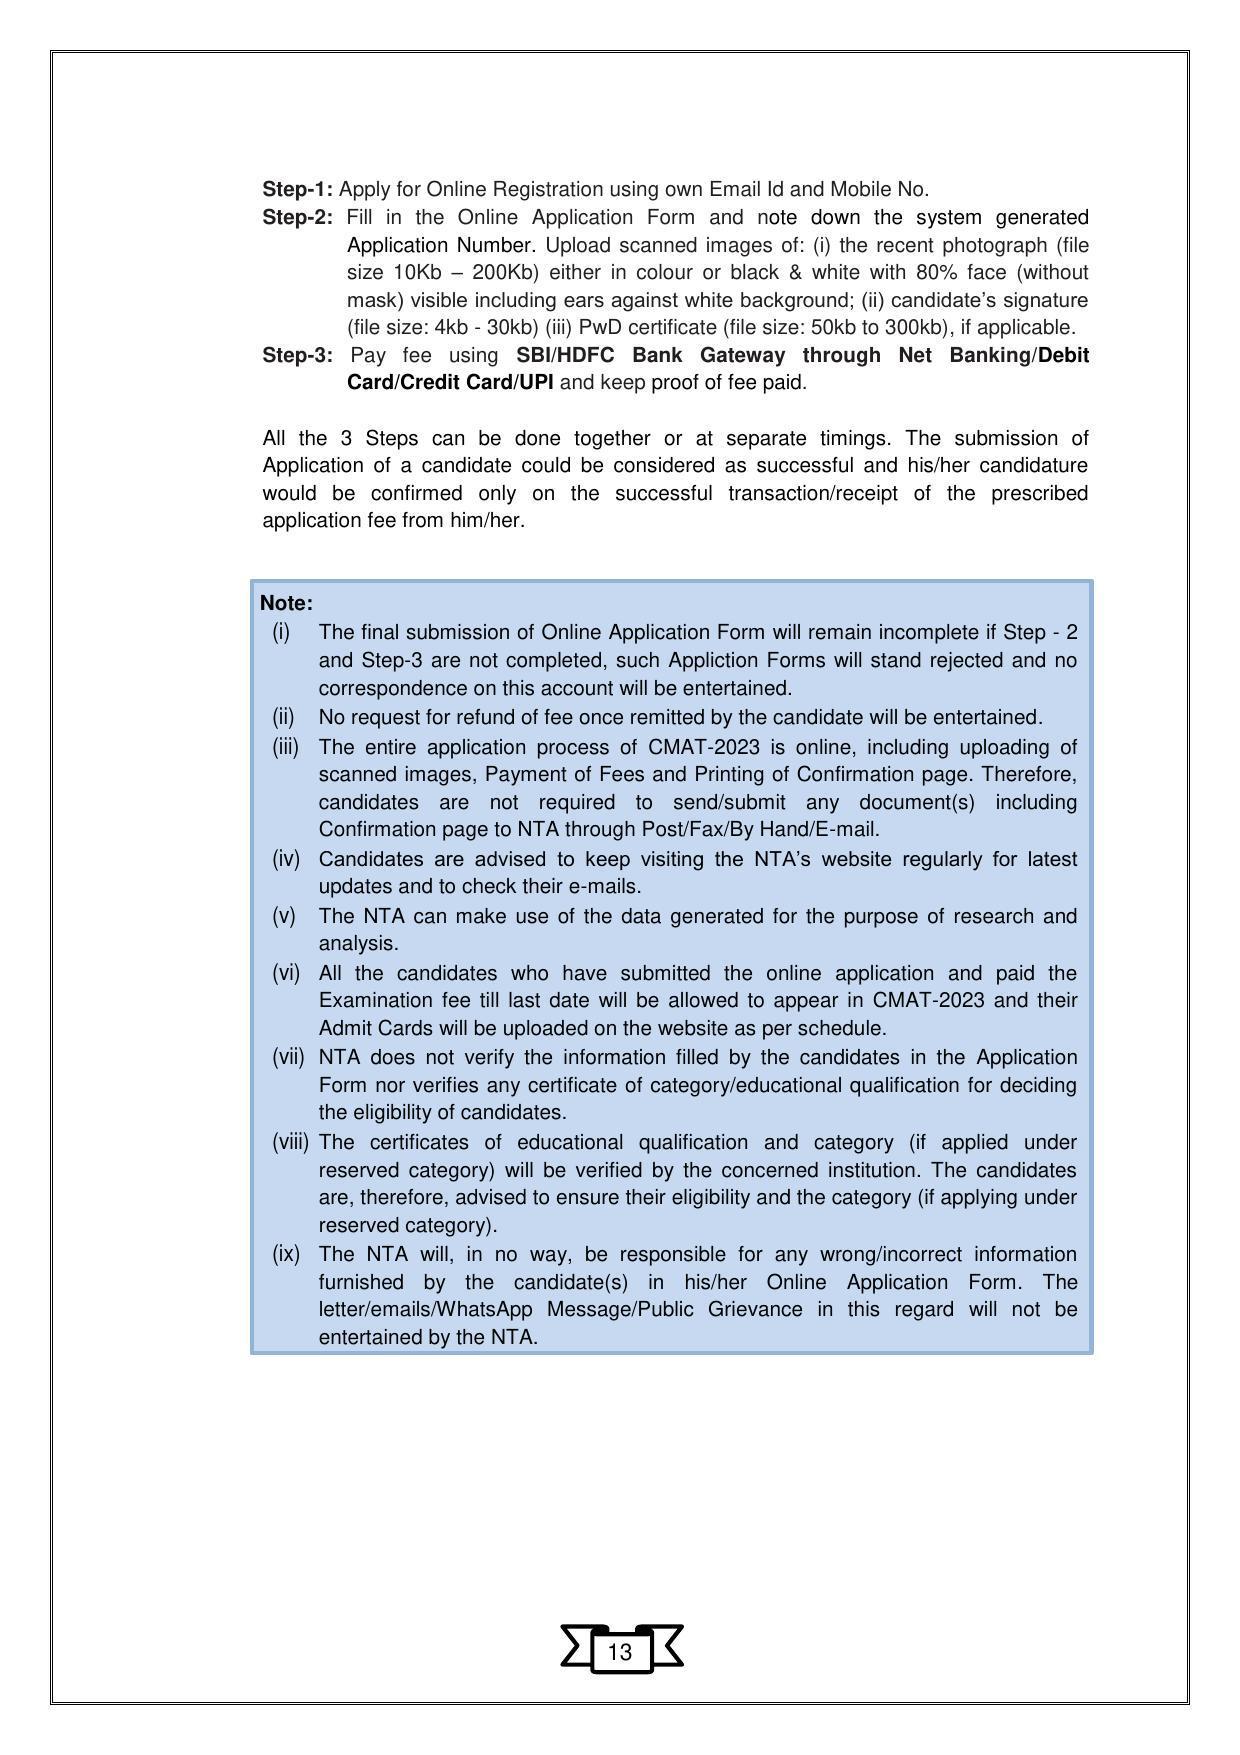 CMAT 2023 Information Bulletin - Page 16